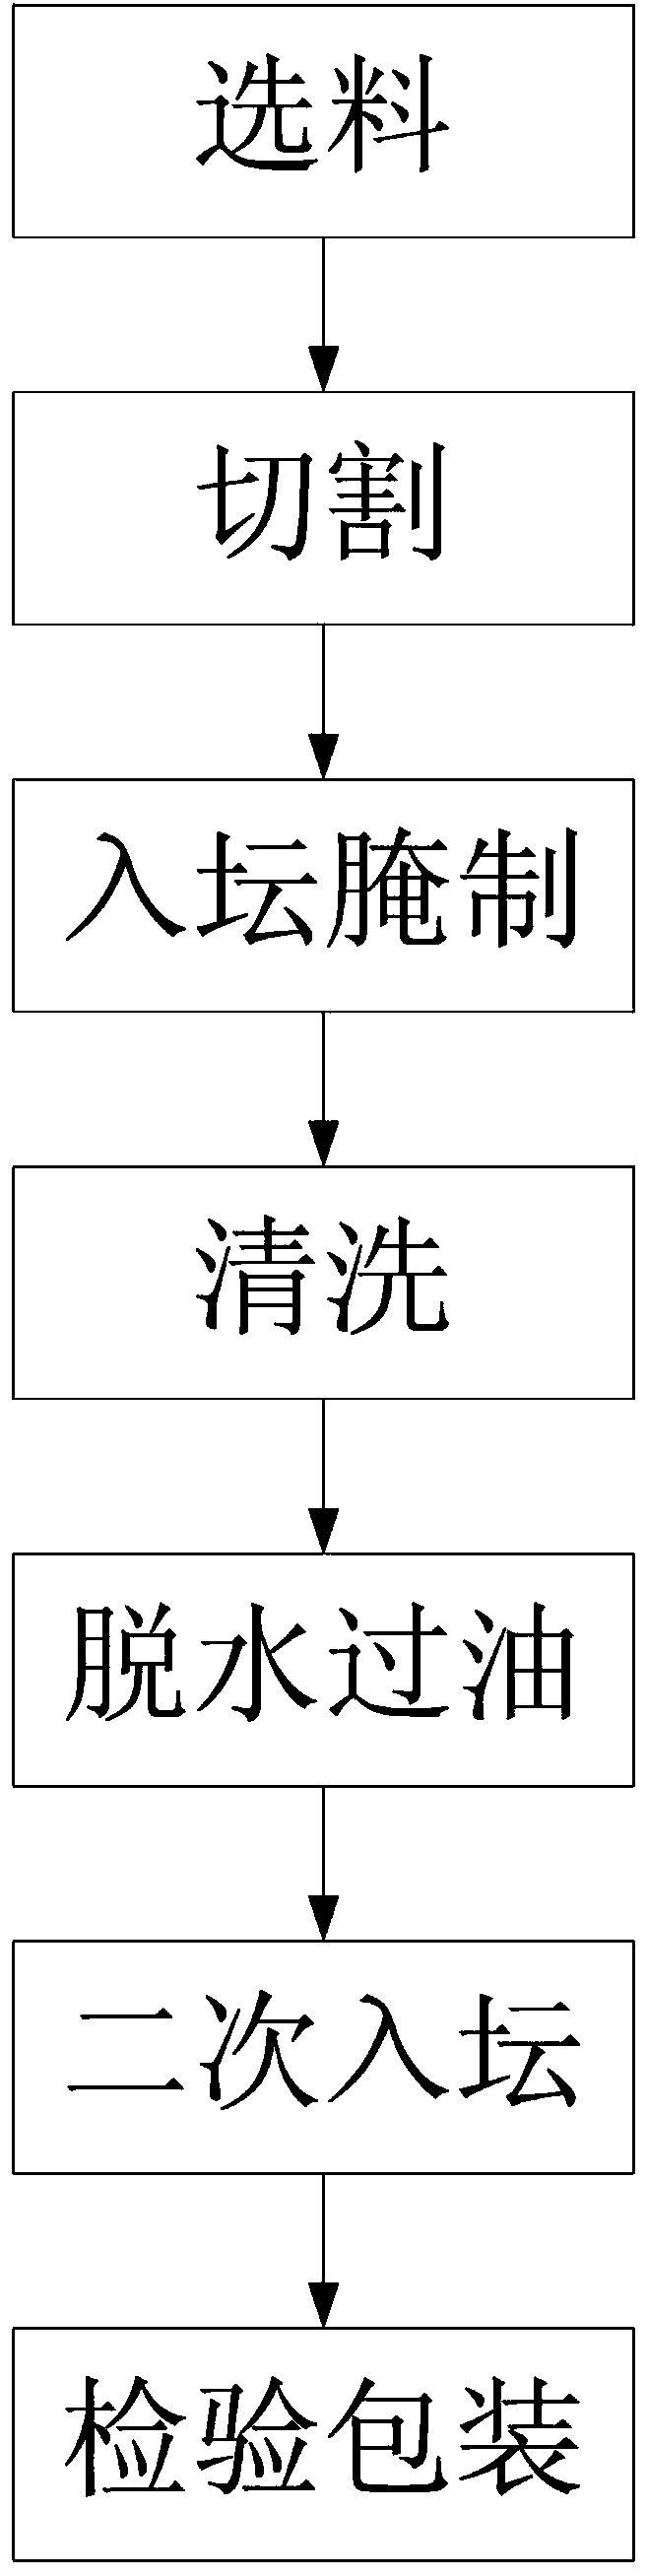 Production process for diced pork in pot